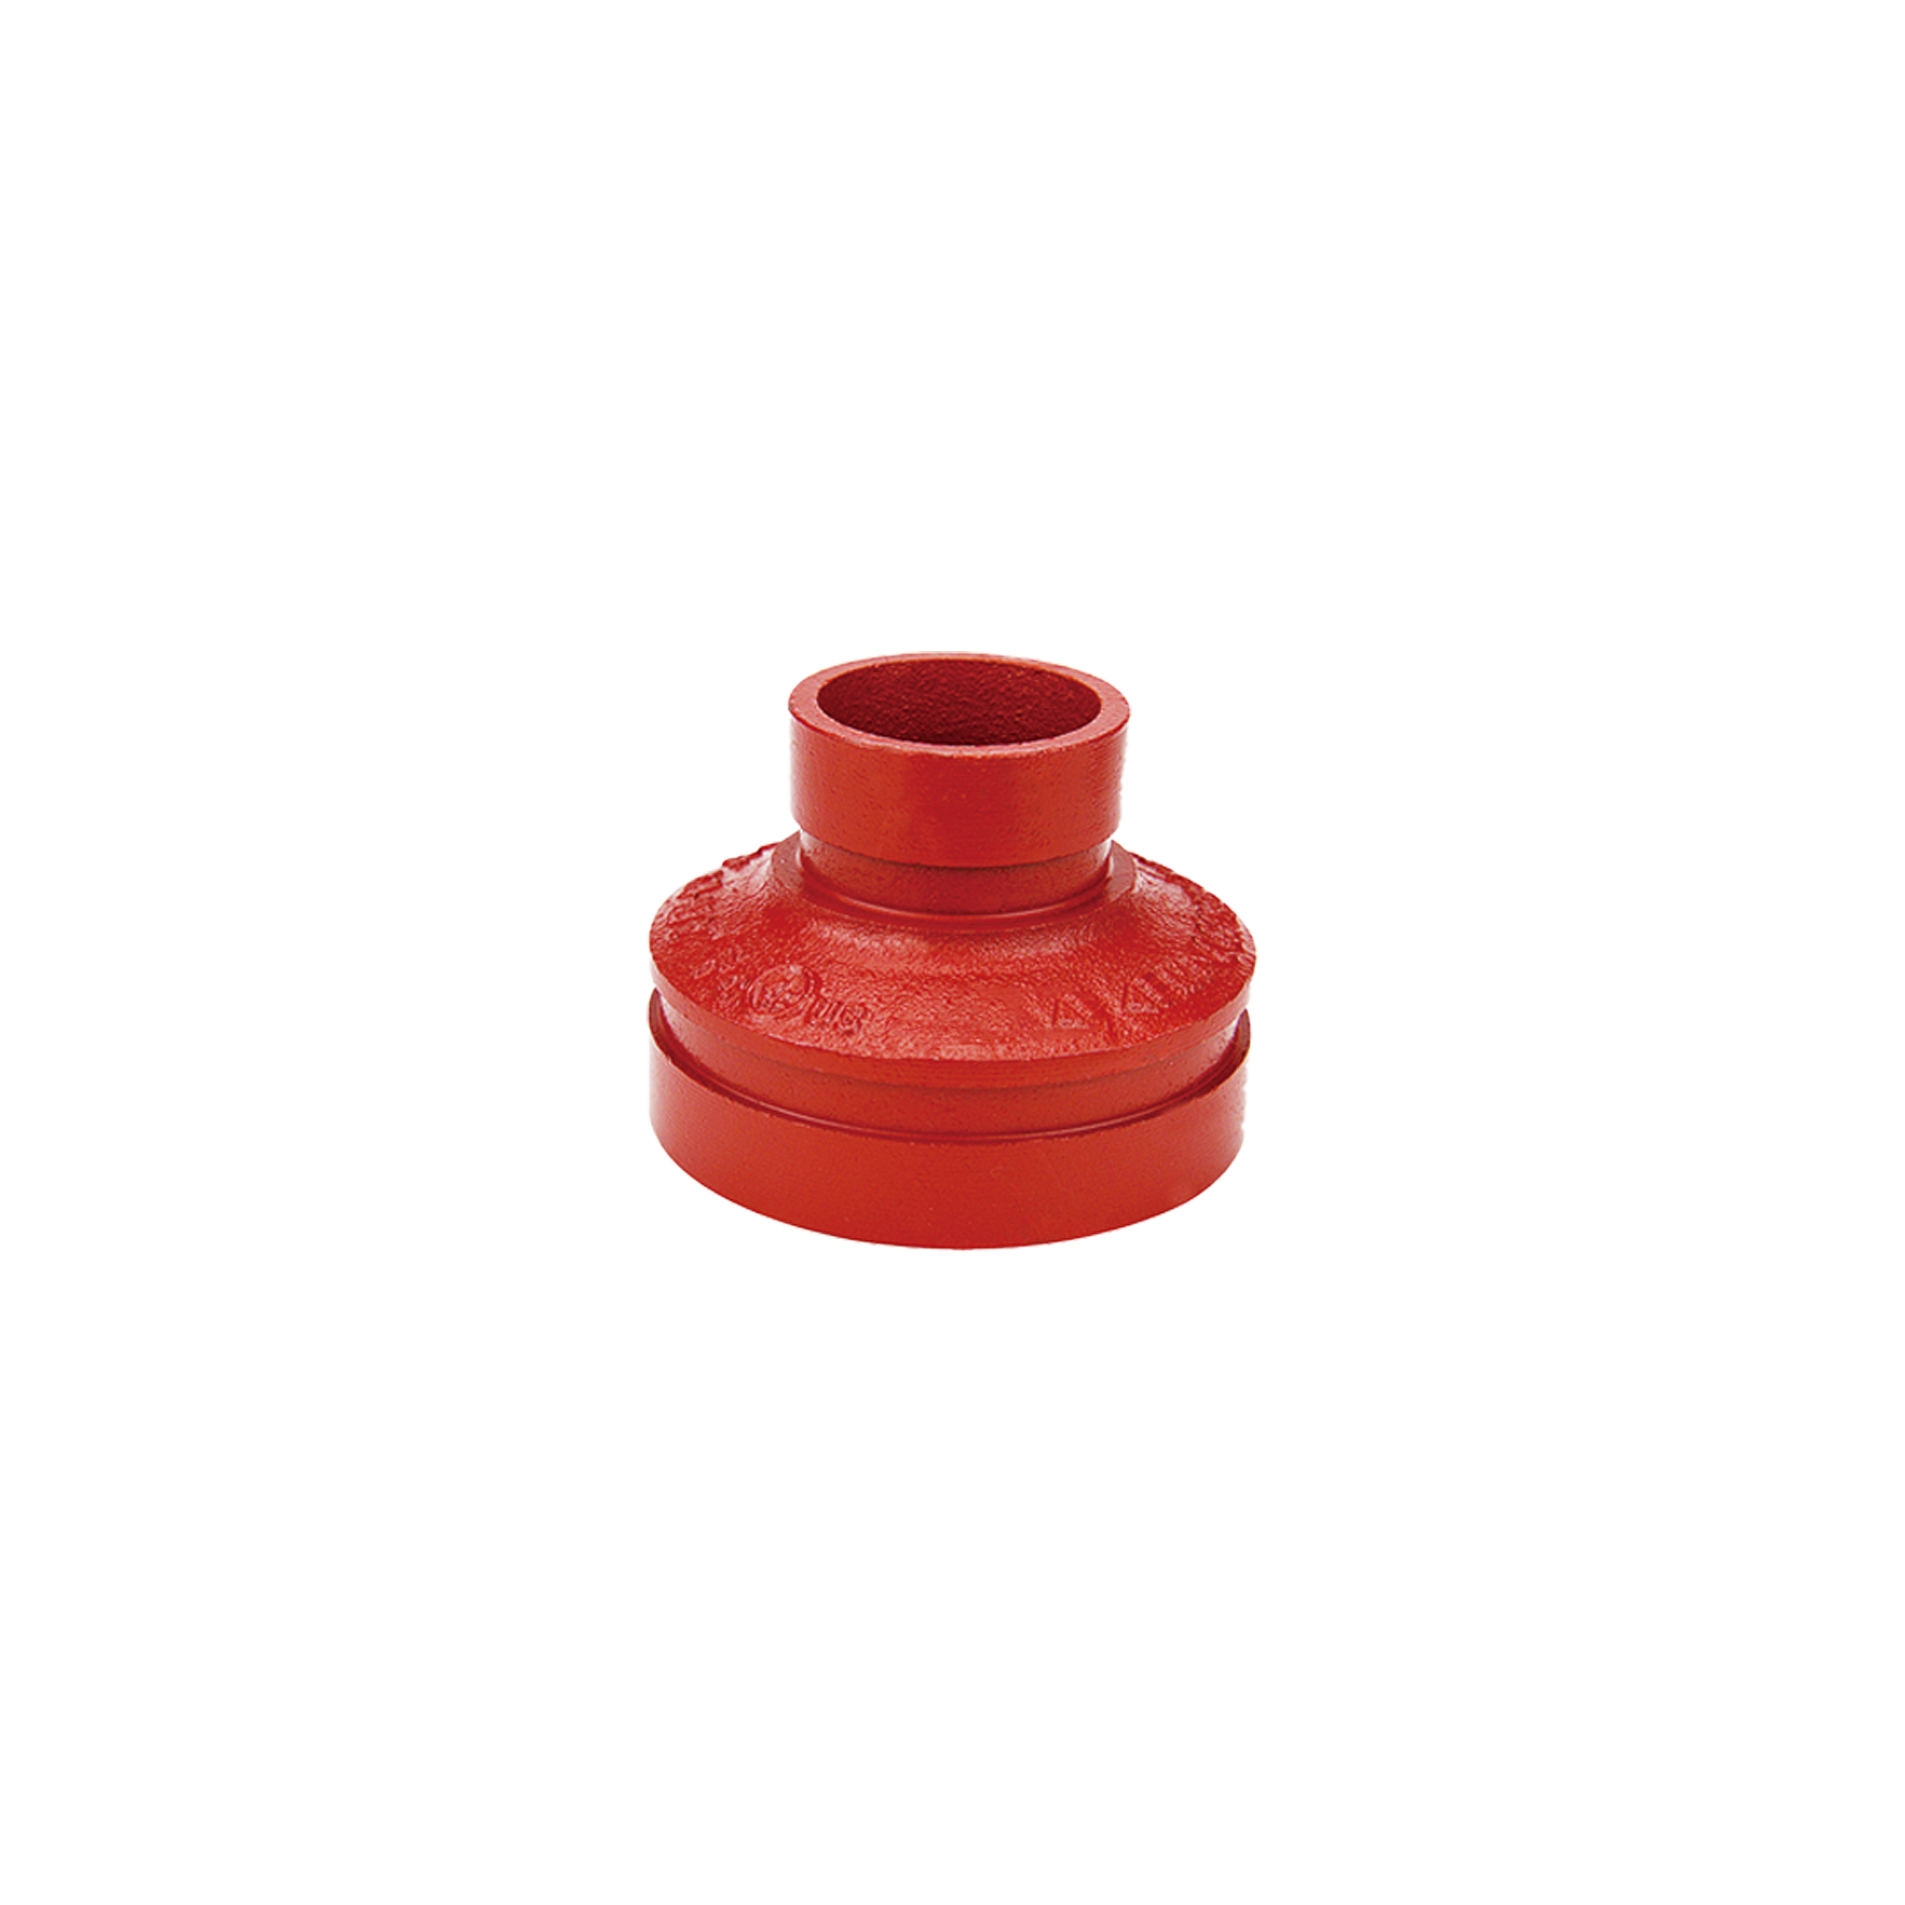 Grooved Concentric Reducer Grooved Fittings | Grooved Pipe Fittings | Grooved Fittings Manufacturer